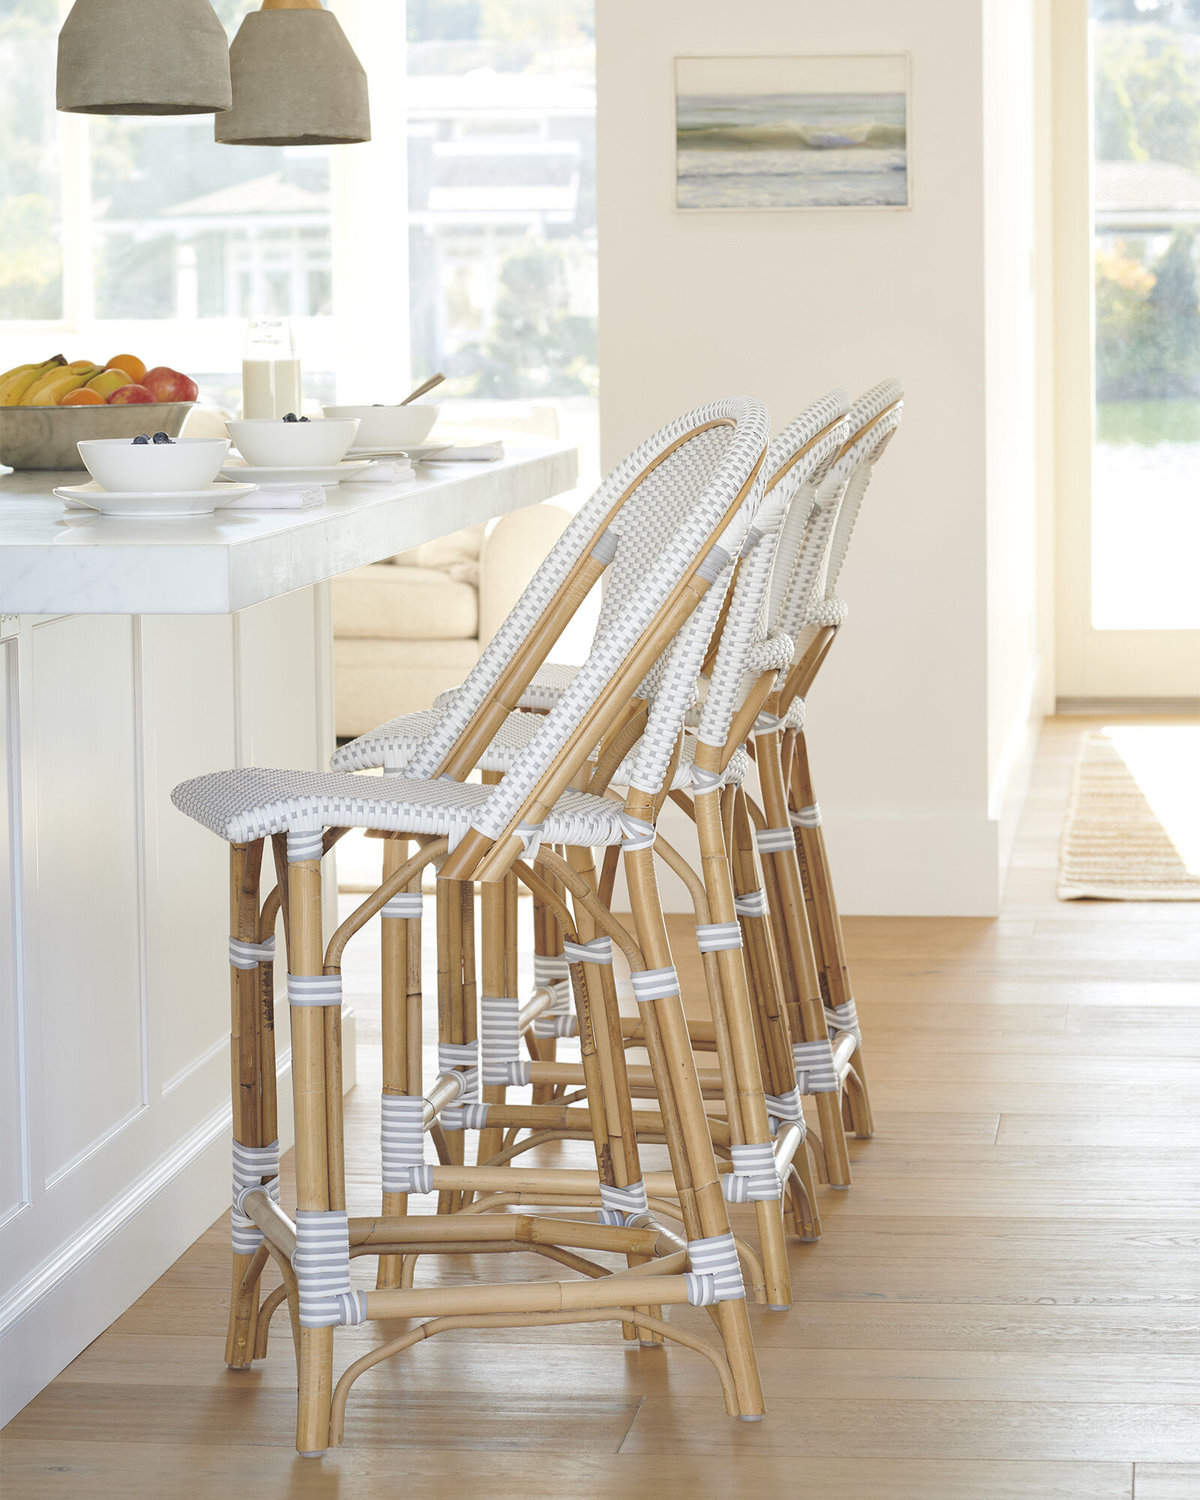 Bar stools in rattan at a white kitchen island